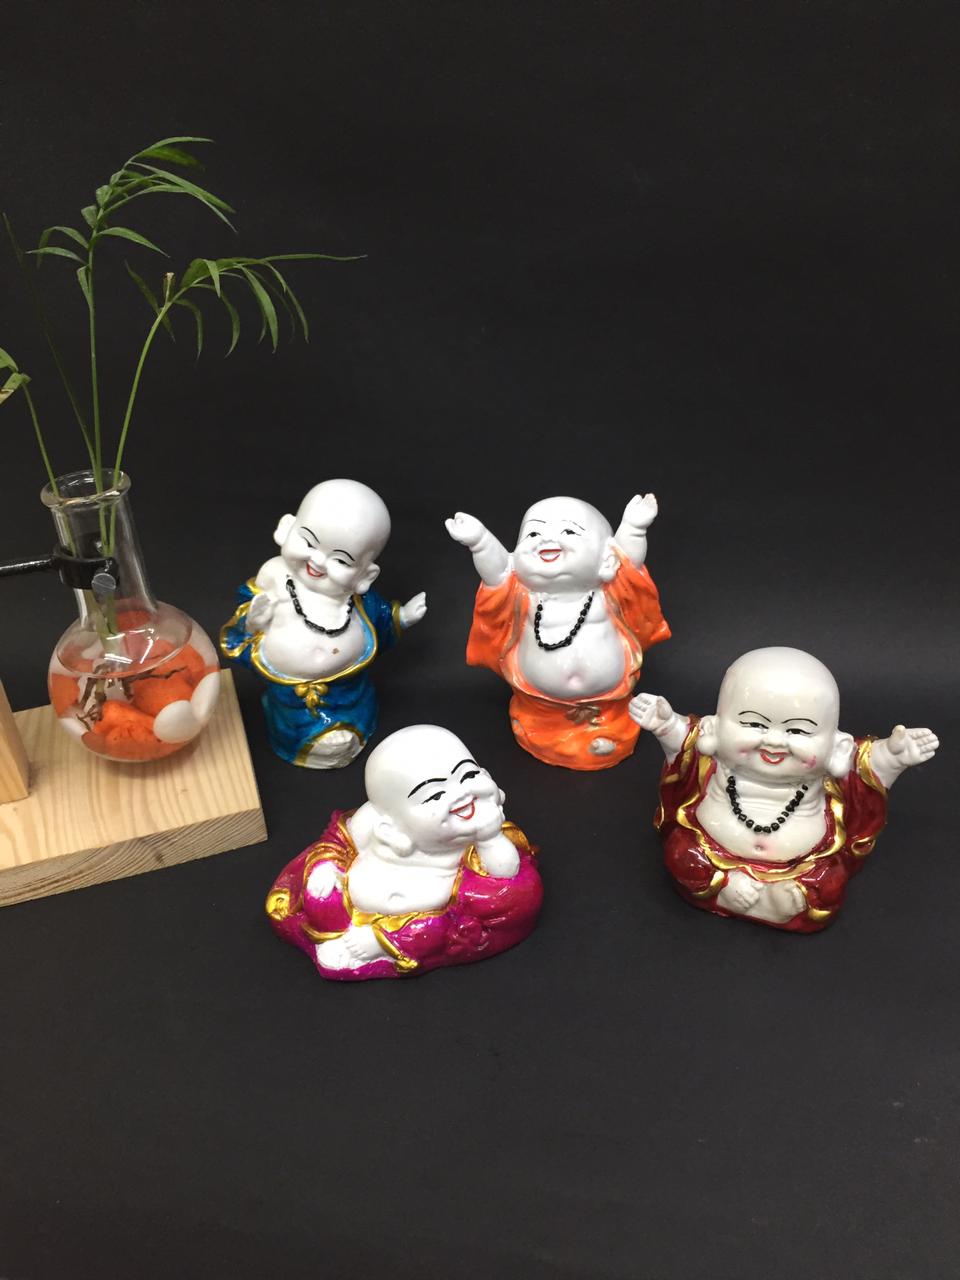 Cute Vibrant Monks In Various Shades Happy Figurines For Décor Tamrpaatra